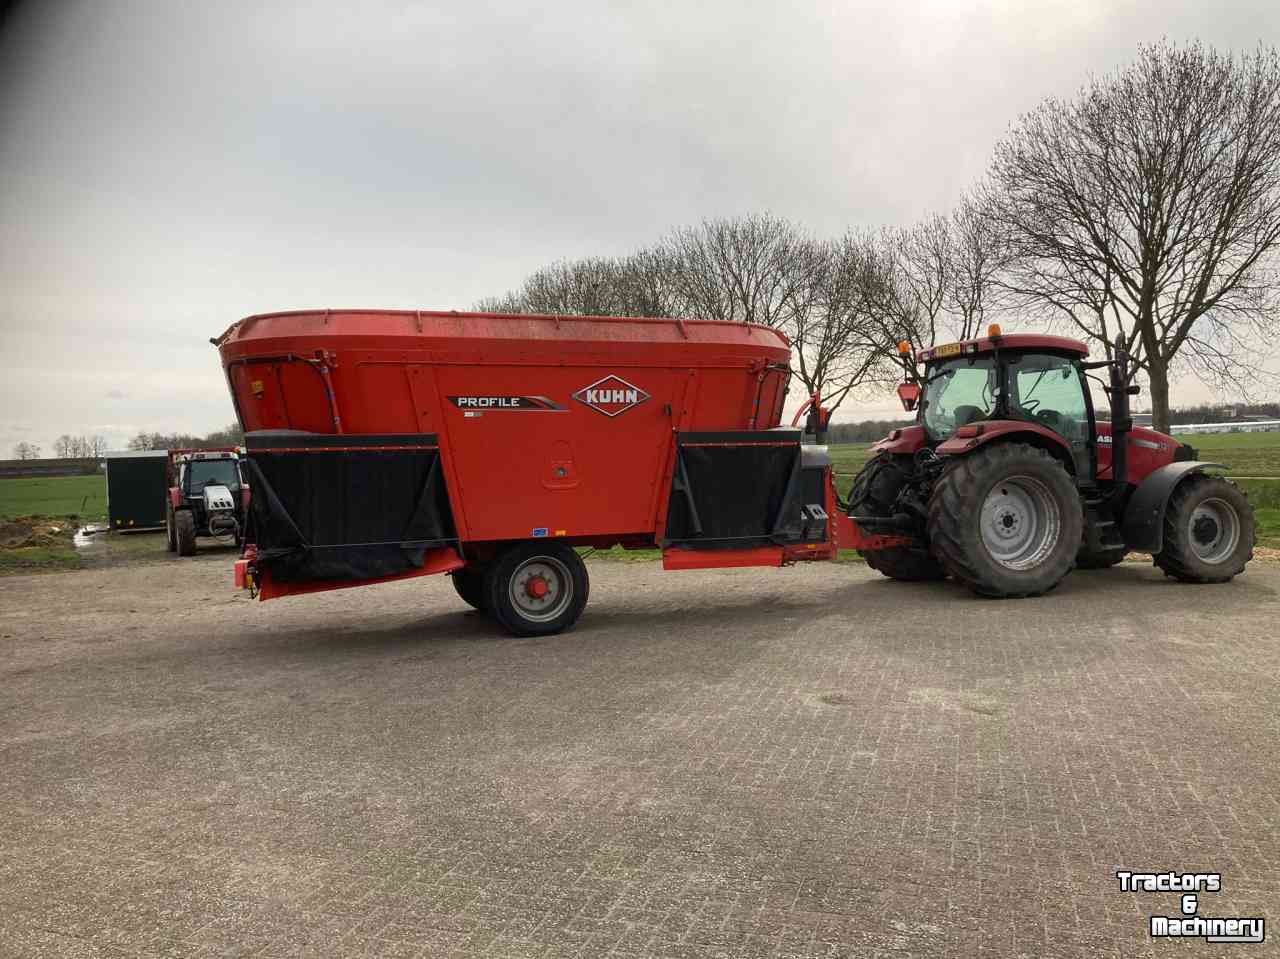 Vertical feed mixer Kuhn Profile DL 24.2